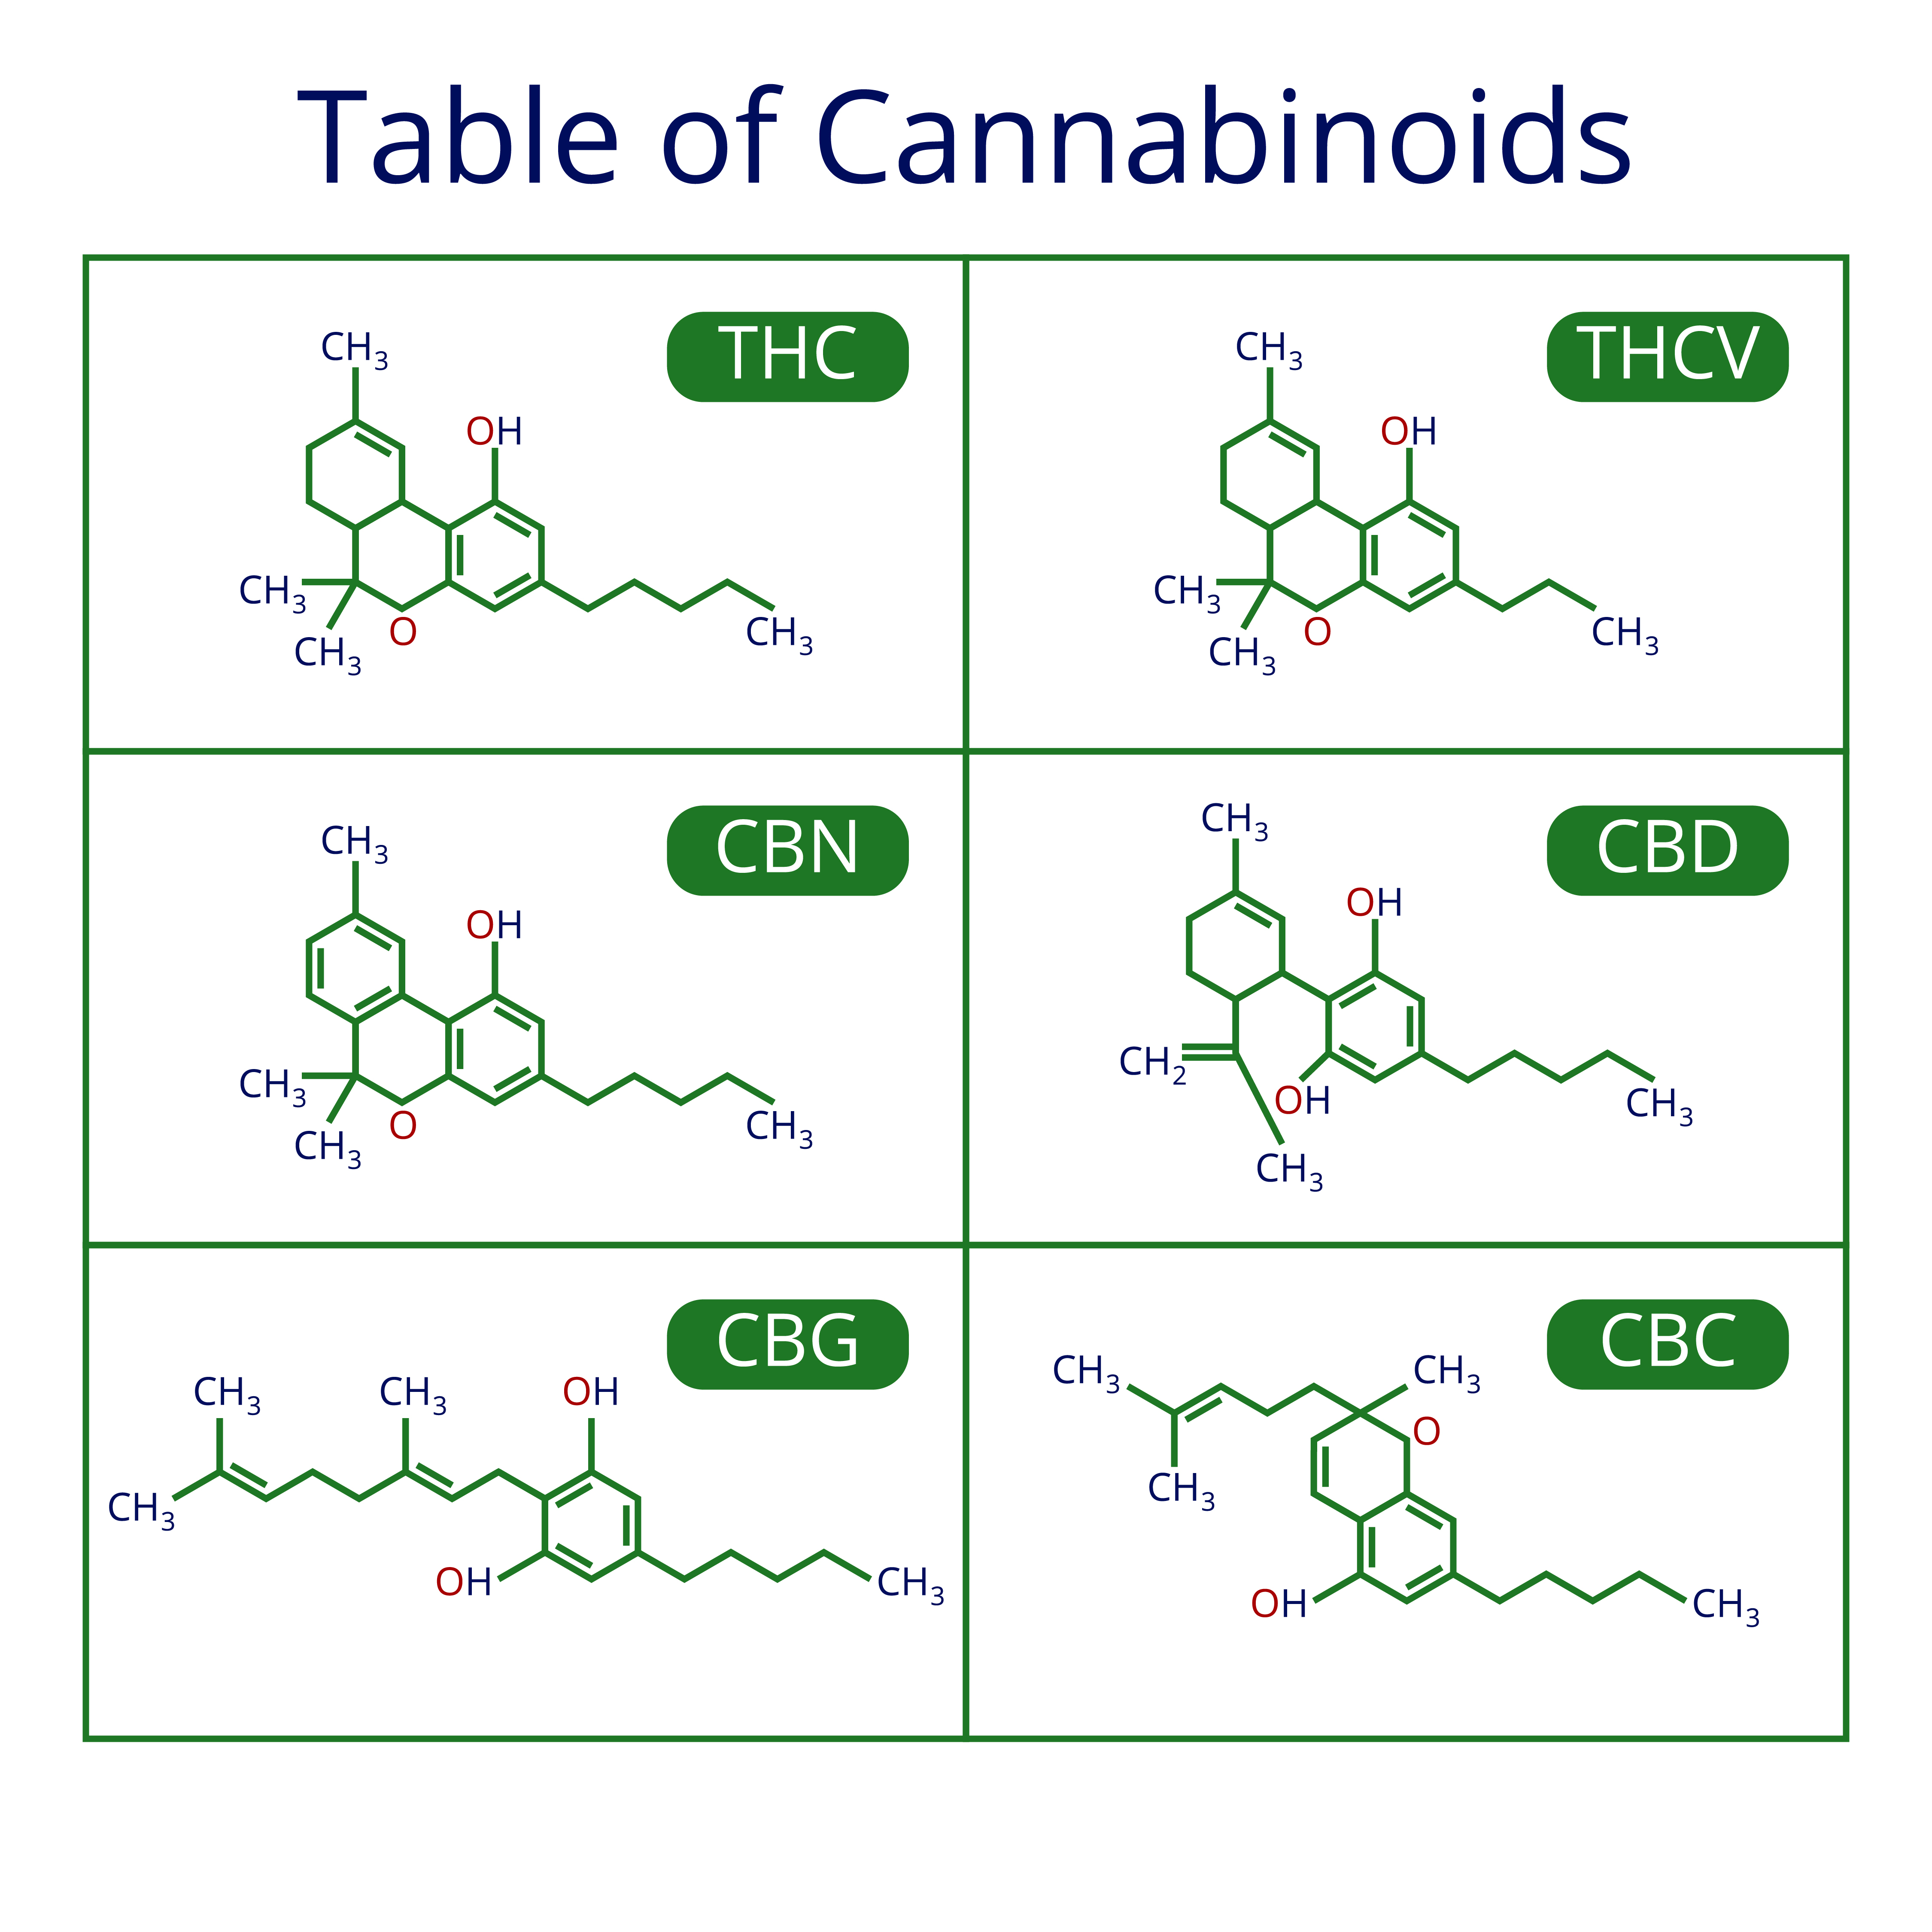 The chemical make-up of different cannabinoids, like CBD and THC